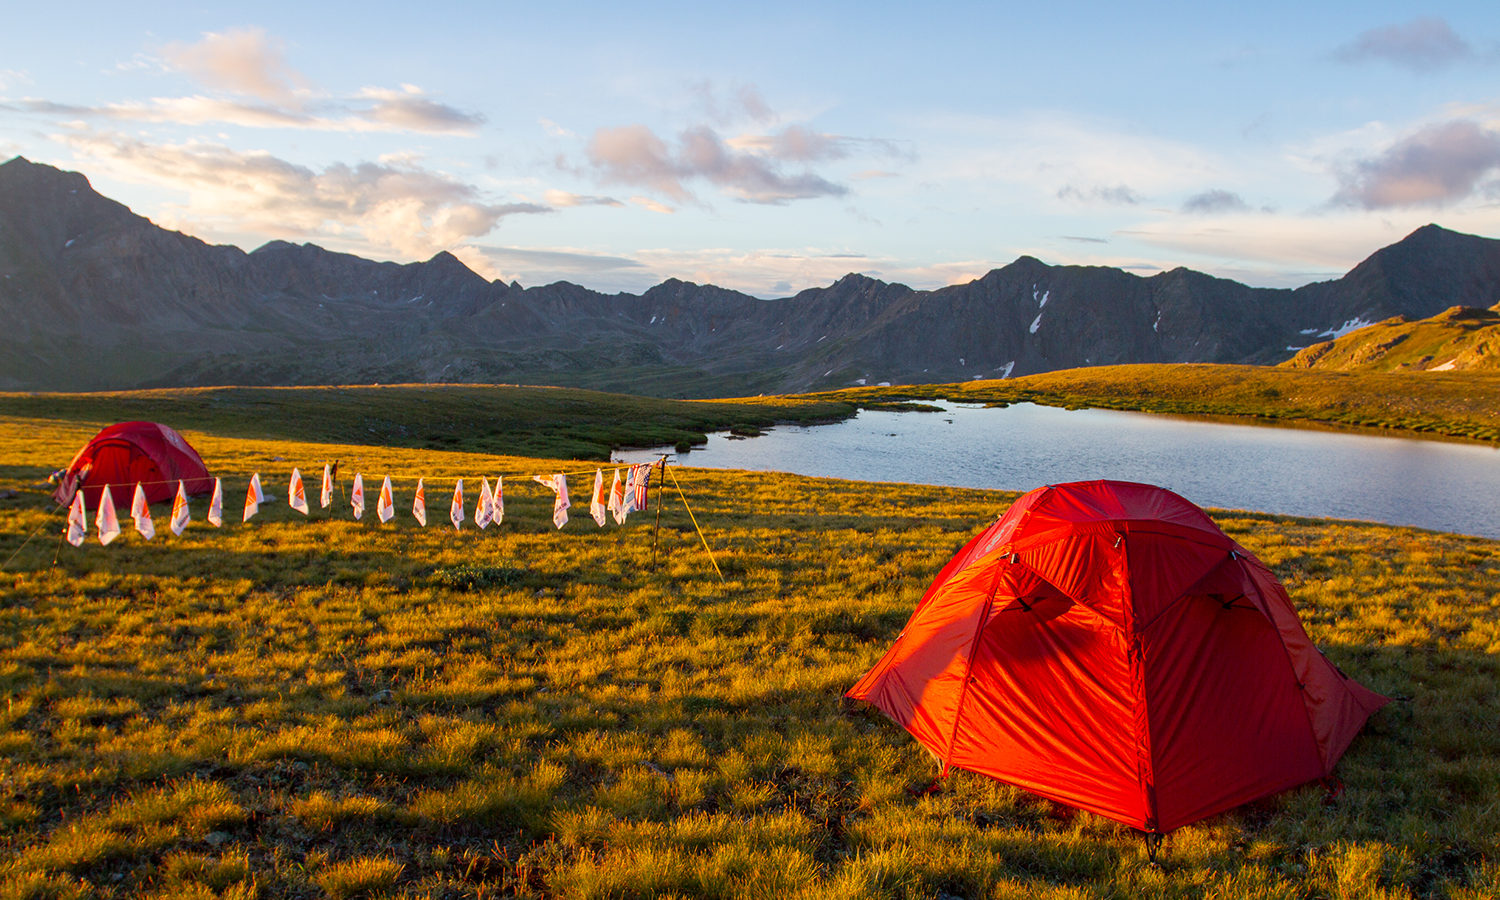 basecamp image showing two orange tents and a sting of flags. mountains and a lake are in the background